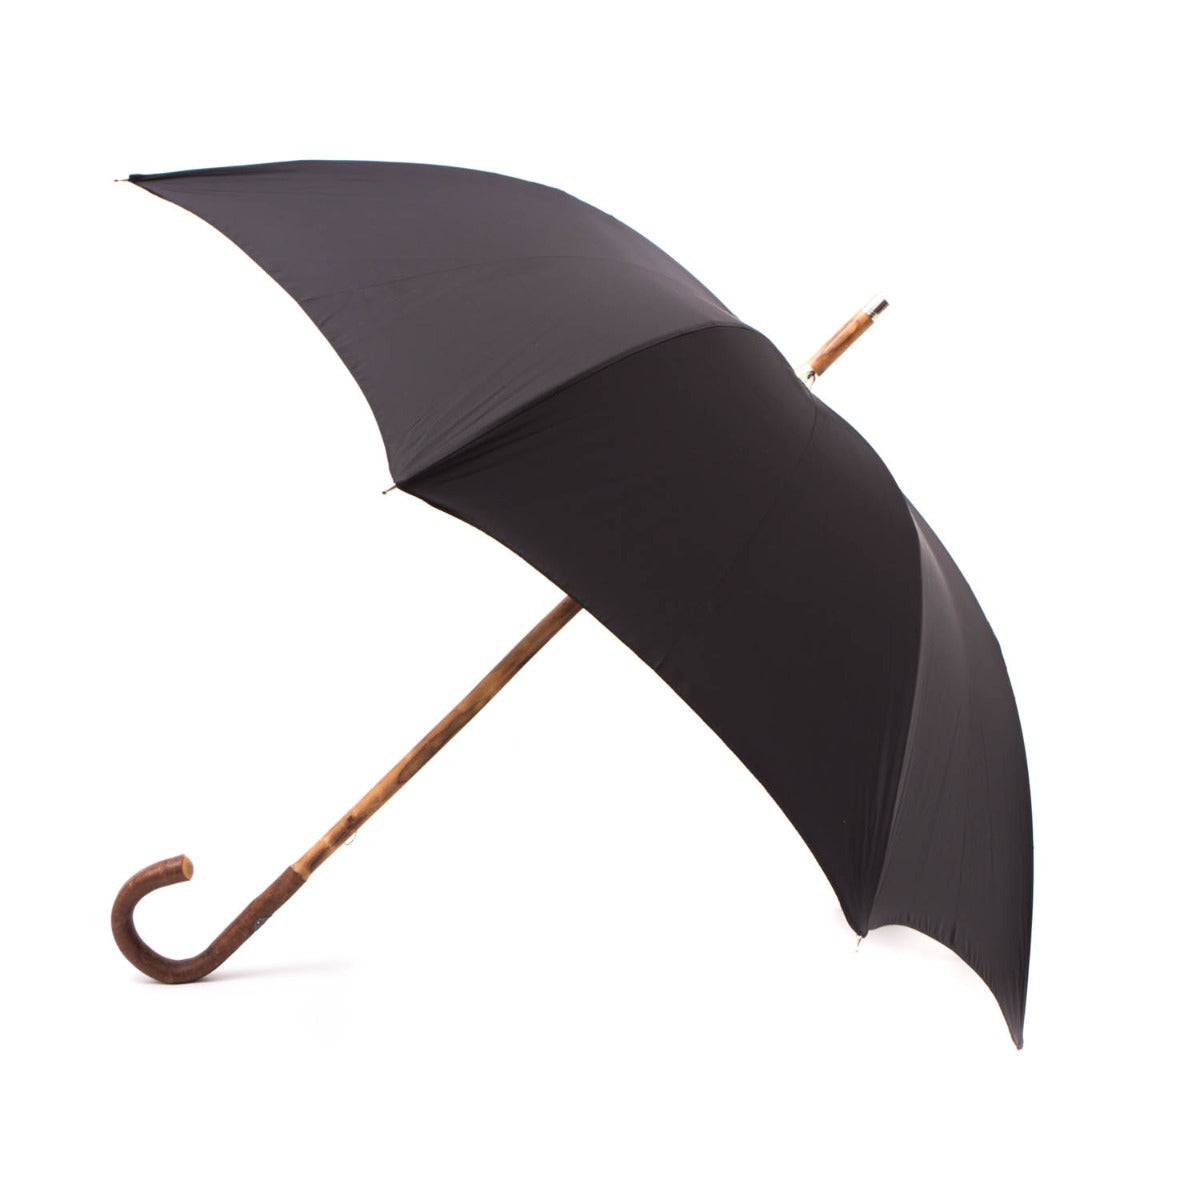 A Cherrywood Solid Stick Umbrella with Black Canopy from KirbyAllison.com on a white background.